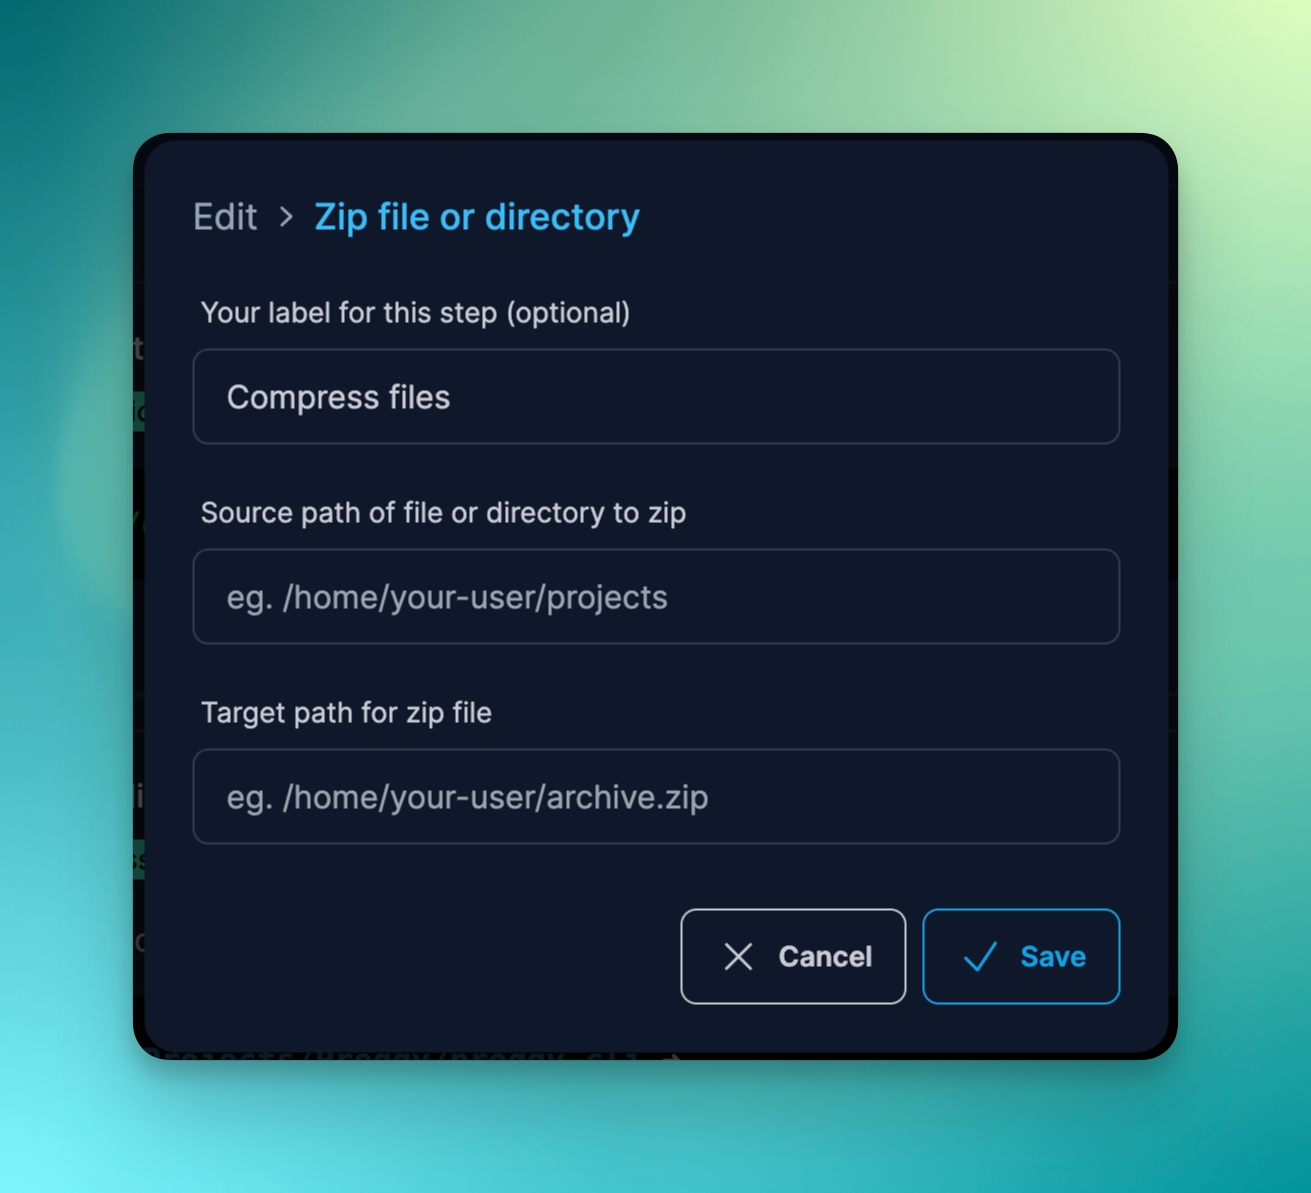 Zip file or directory directive settings